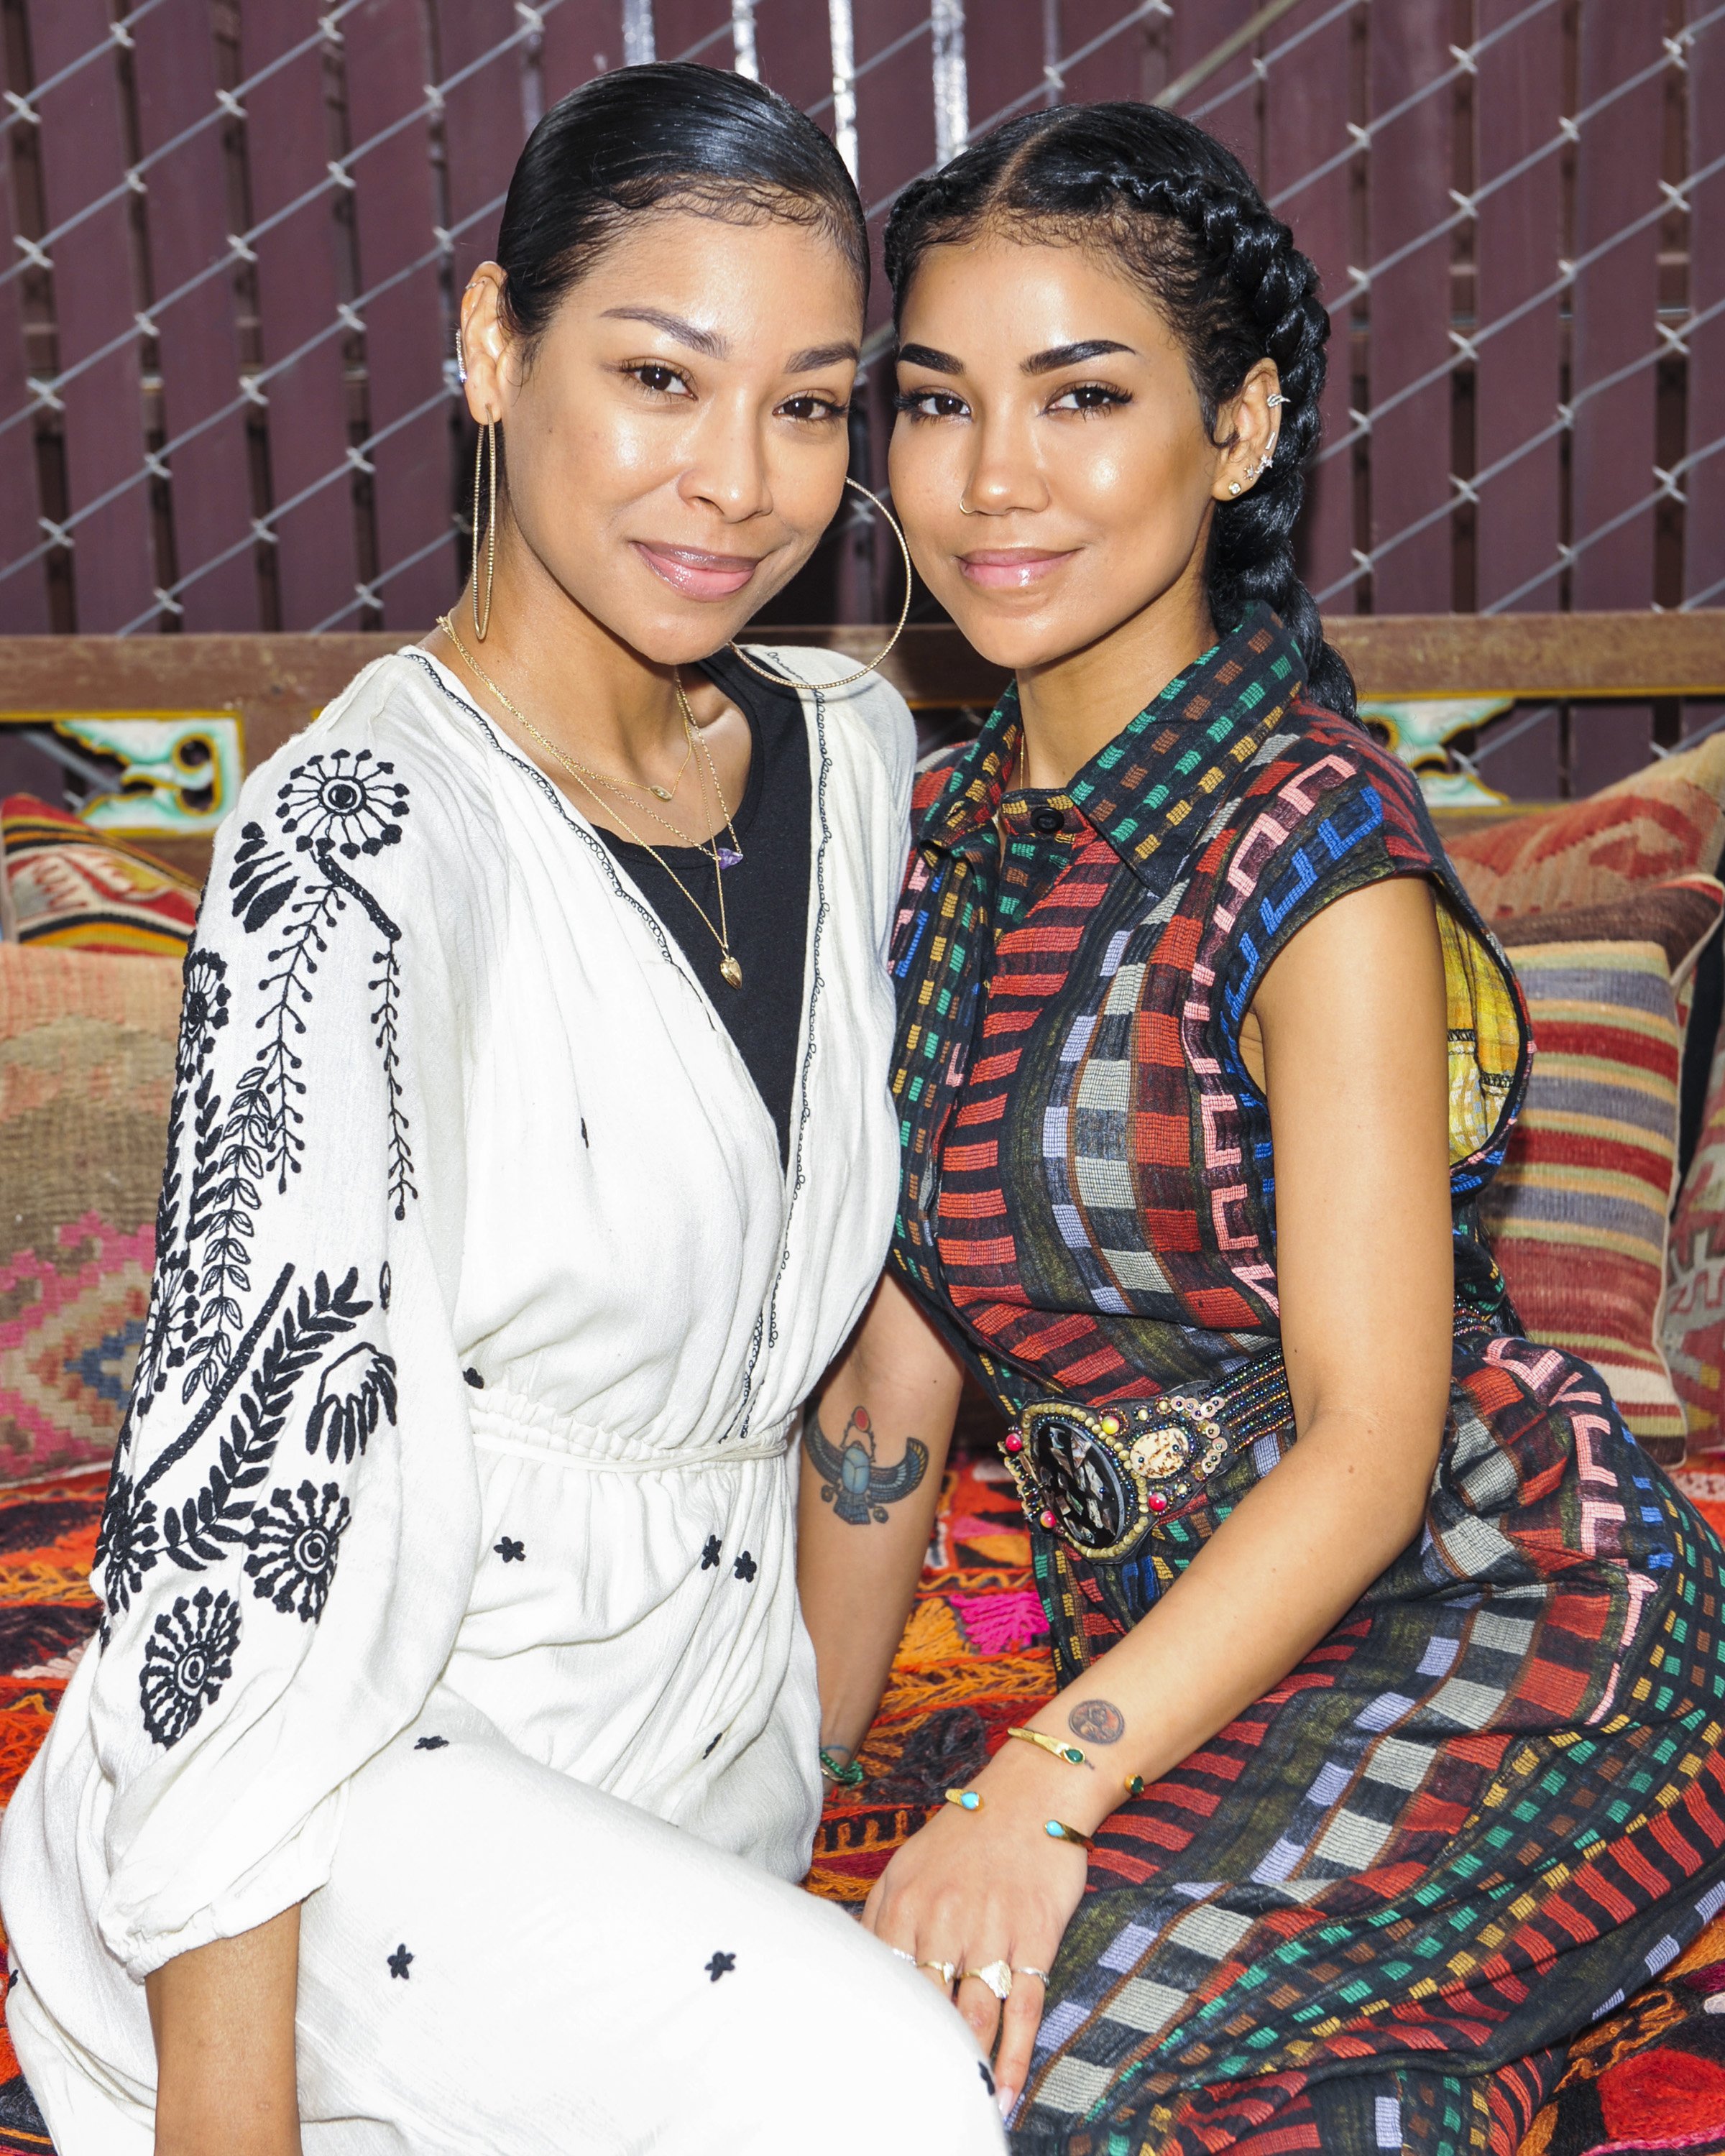 Jhené Aiko's Siblings Brought Both Joy & Sorrow to Her Life